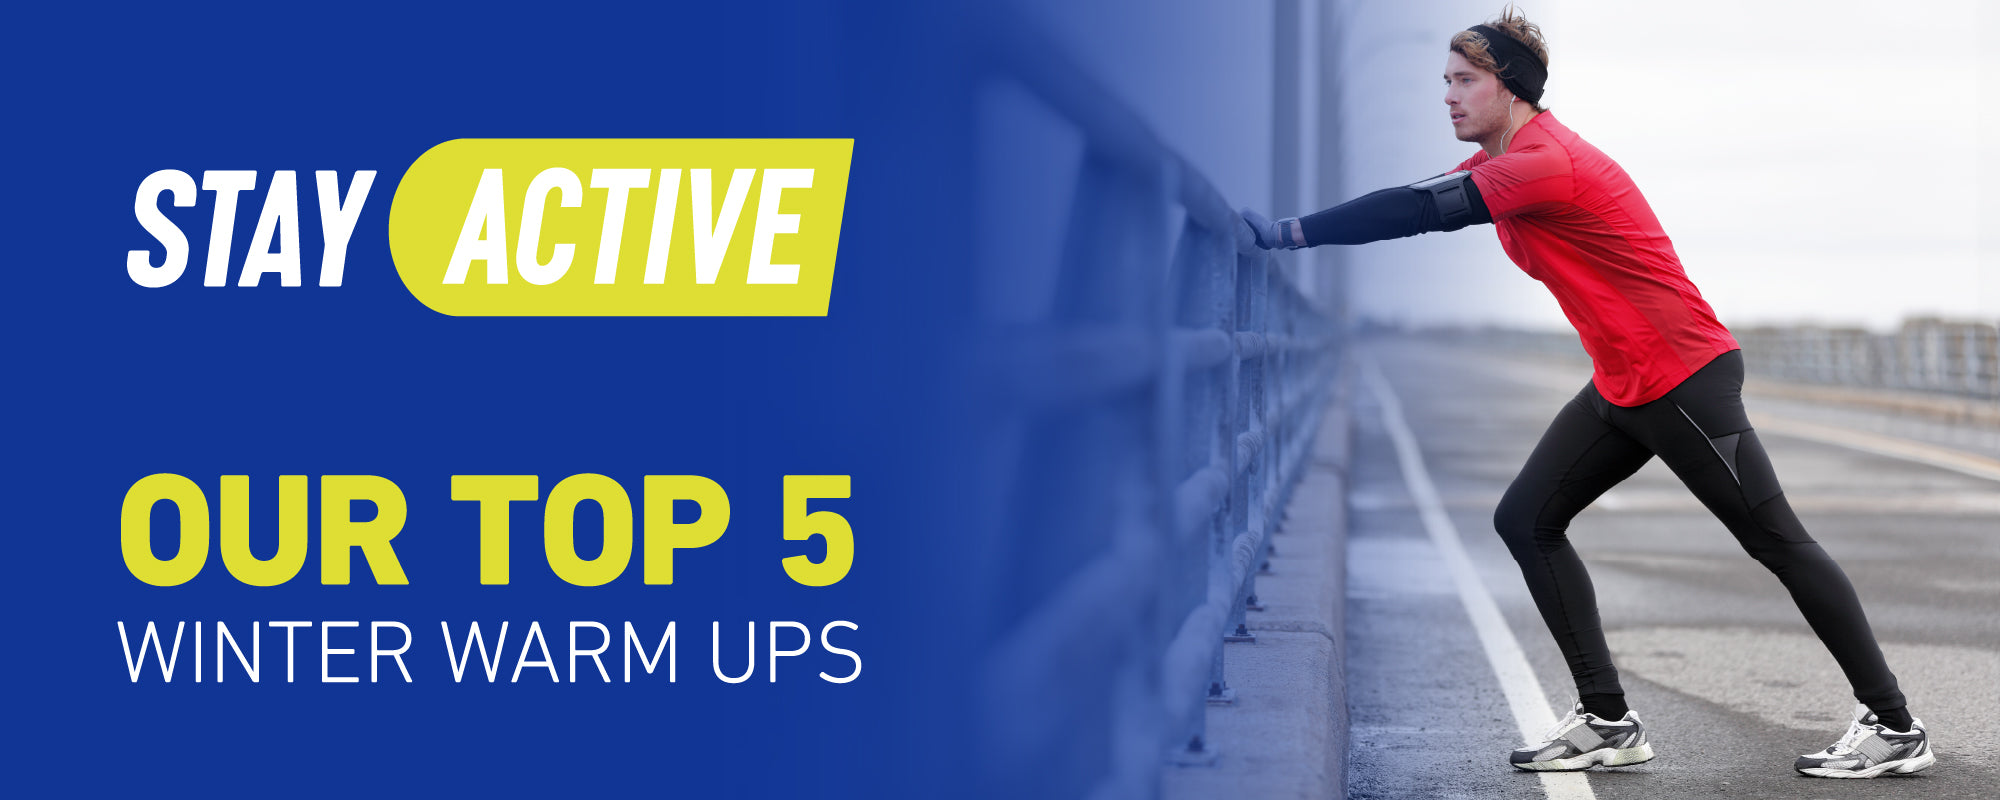 Stay active with our top 5 warm ups for running in cold weather